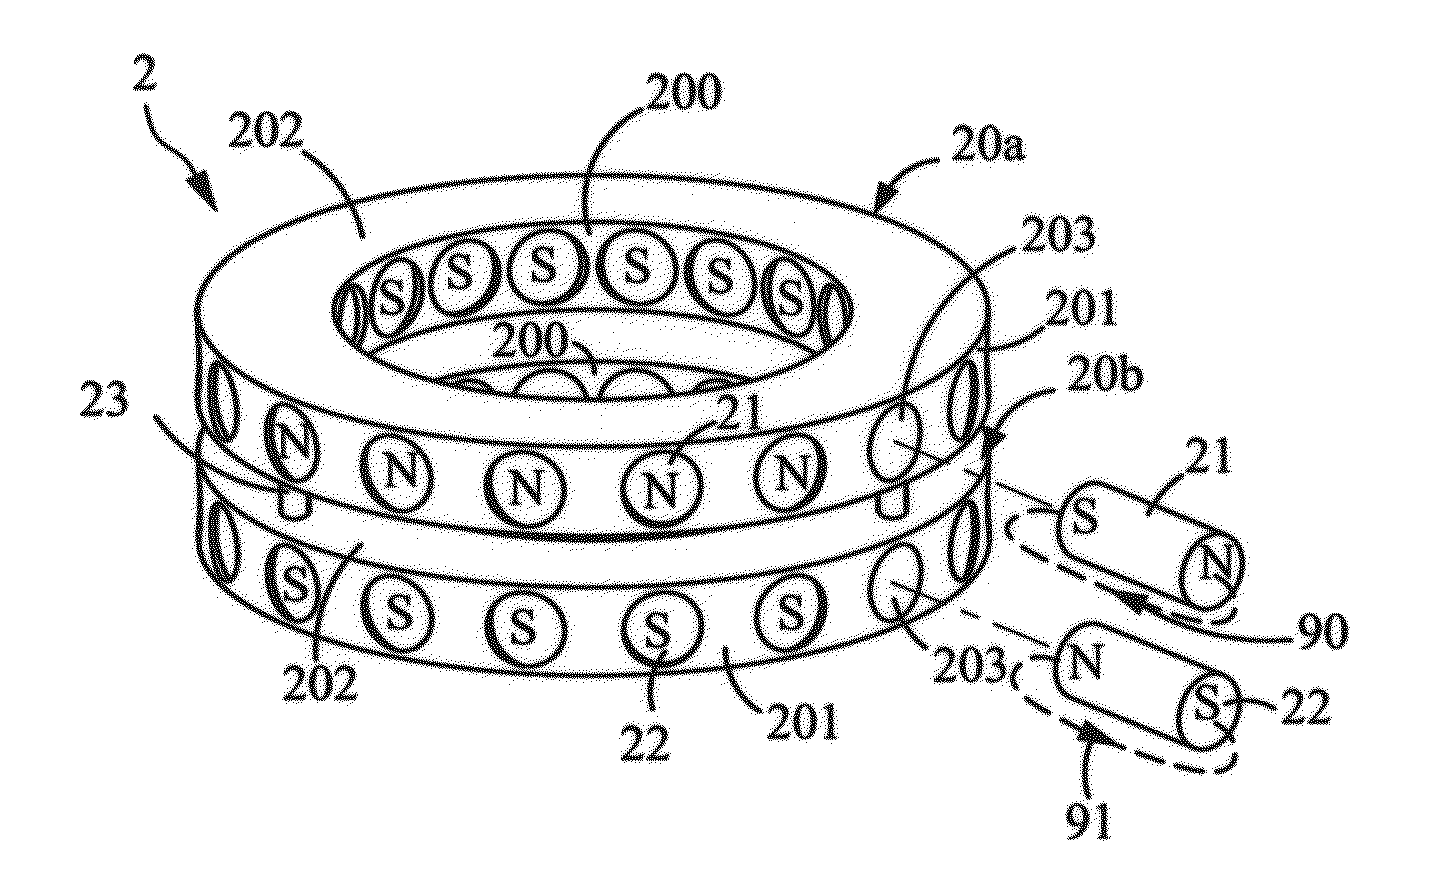 Magnetic modue of electron cyclotron resonance and electron cyclotron resonance apparatus using the same